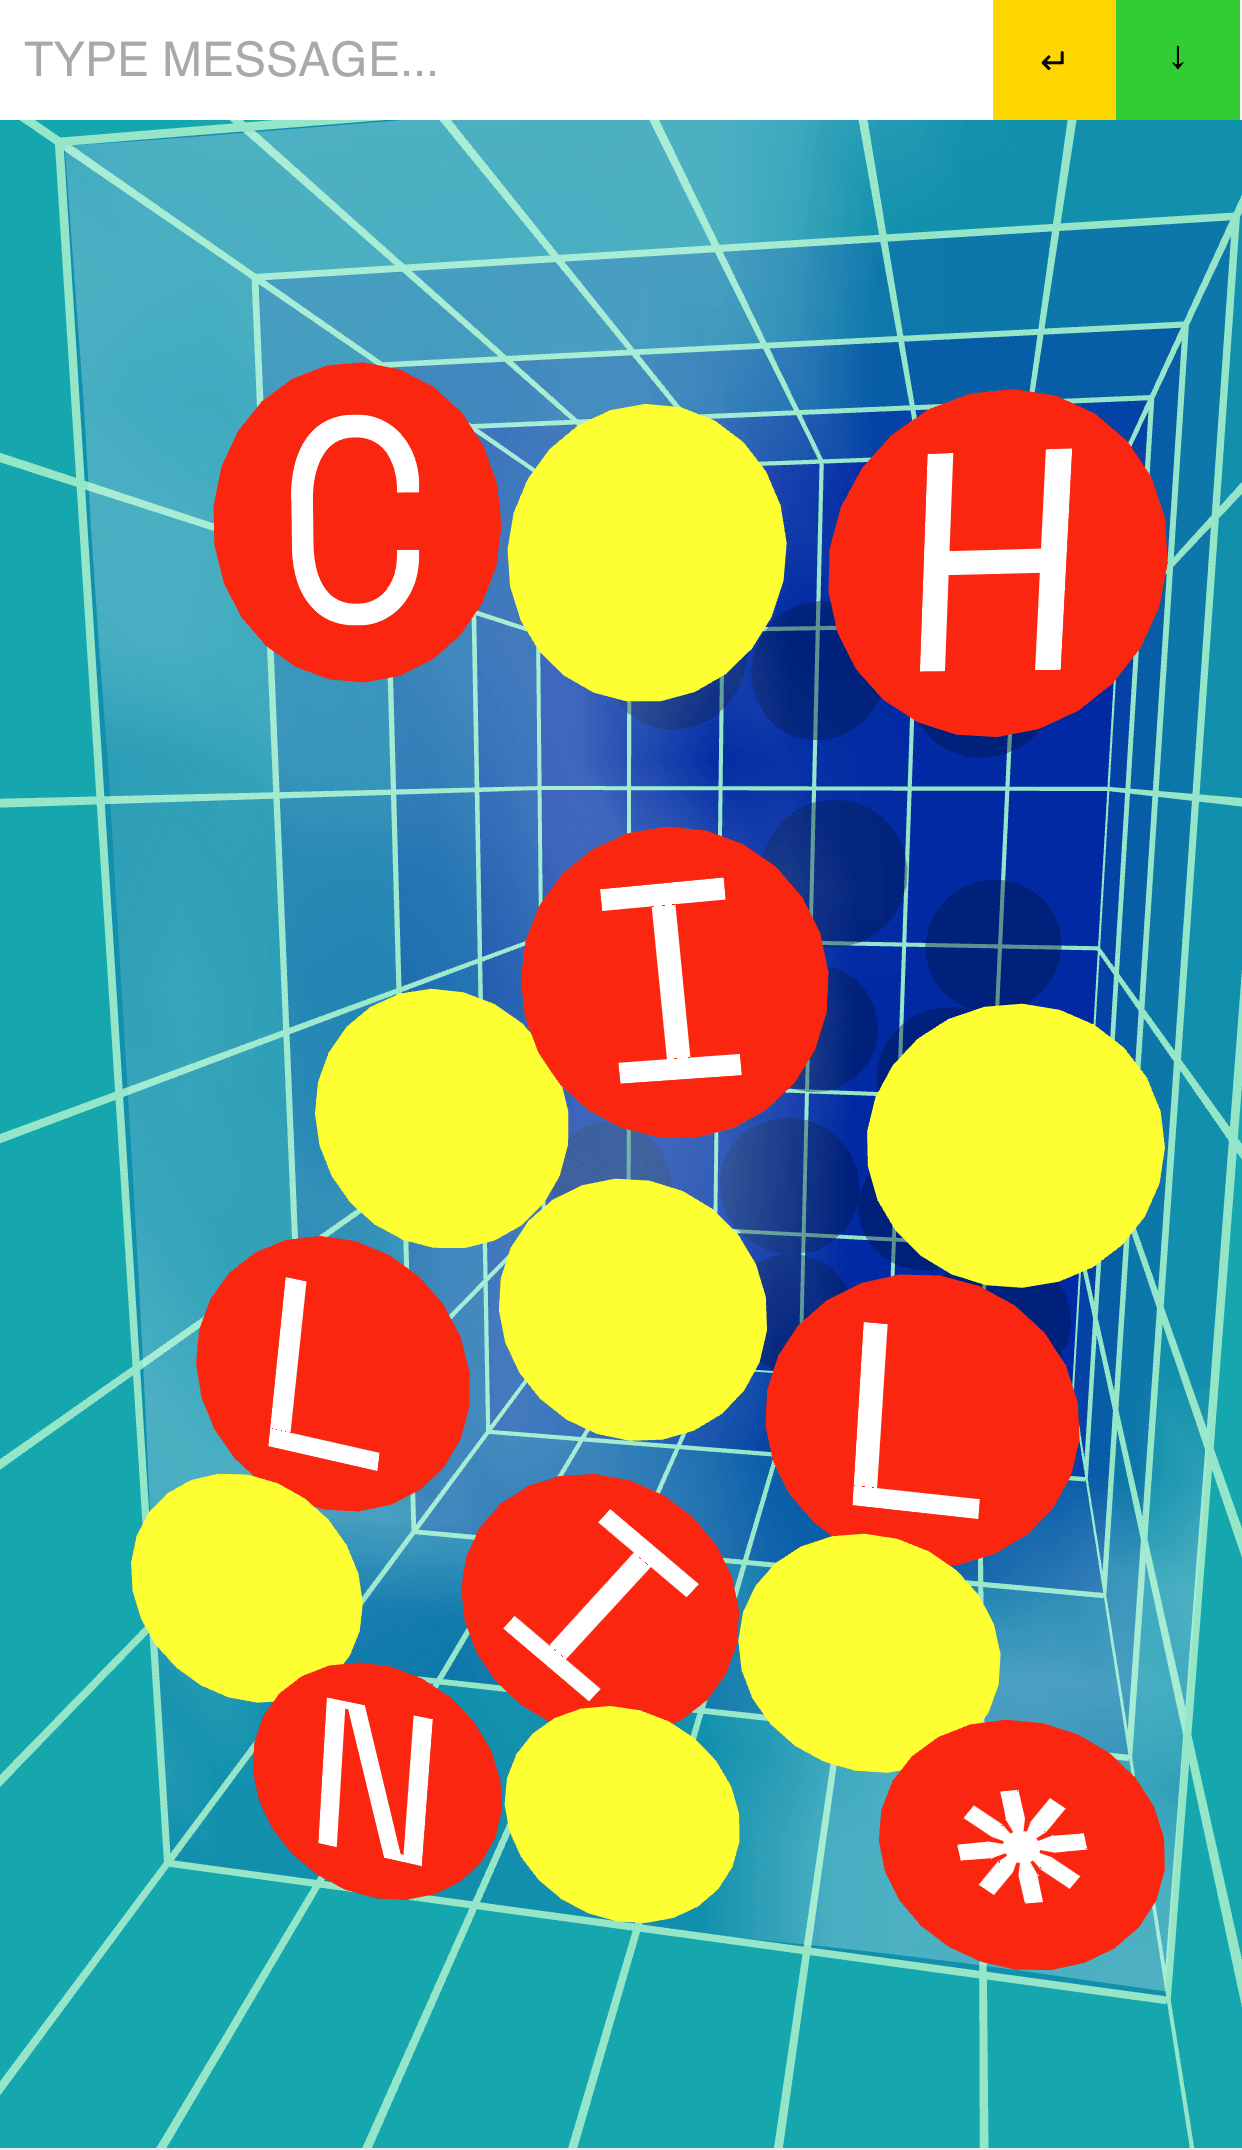 A screenshot of a poster with red and yellow circles of letters from the word chillin against a blue tile background that changes perspective on a mobile device. 
              At the top, there is a text input box to enter a message and download your own poster